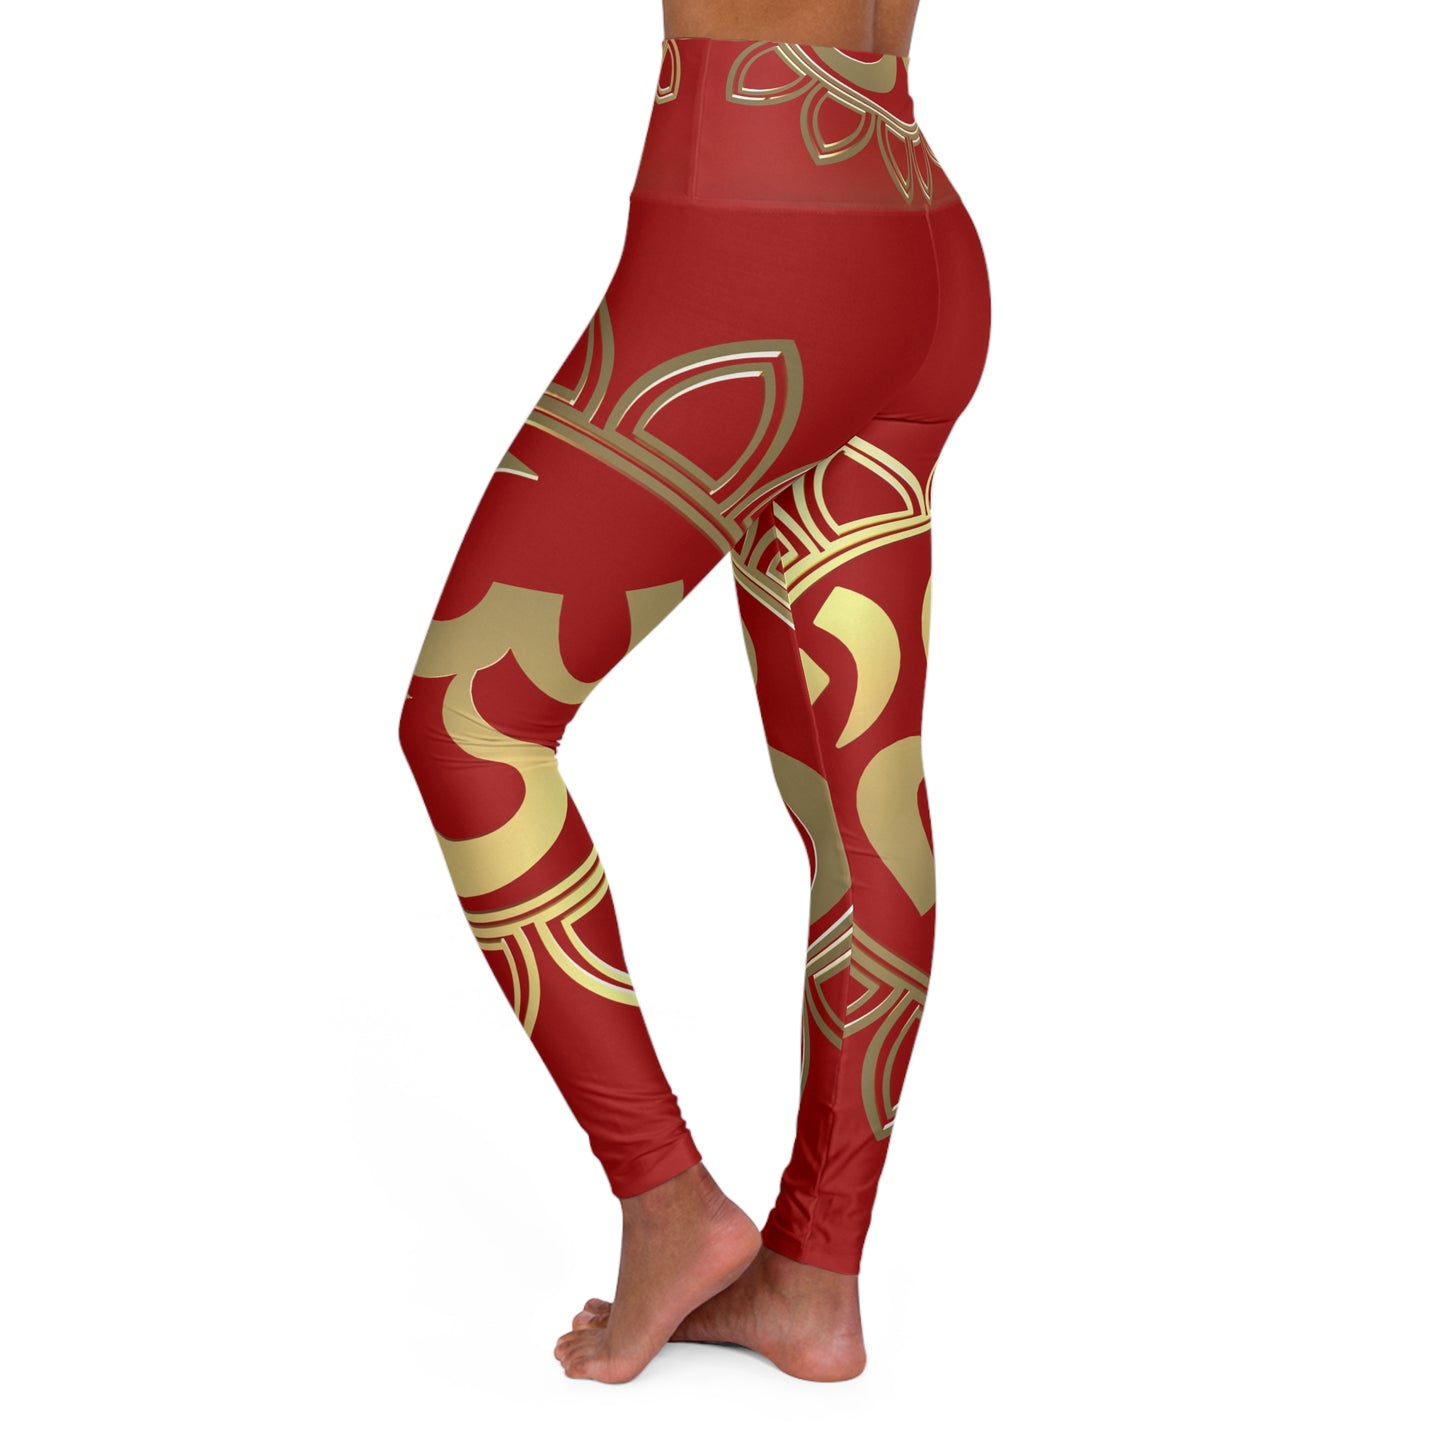 Red & Gold OHM Skinny Fit High Waisted Yoga Leggings, Expertly Crafted in the USA